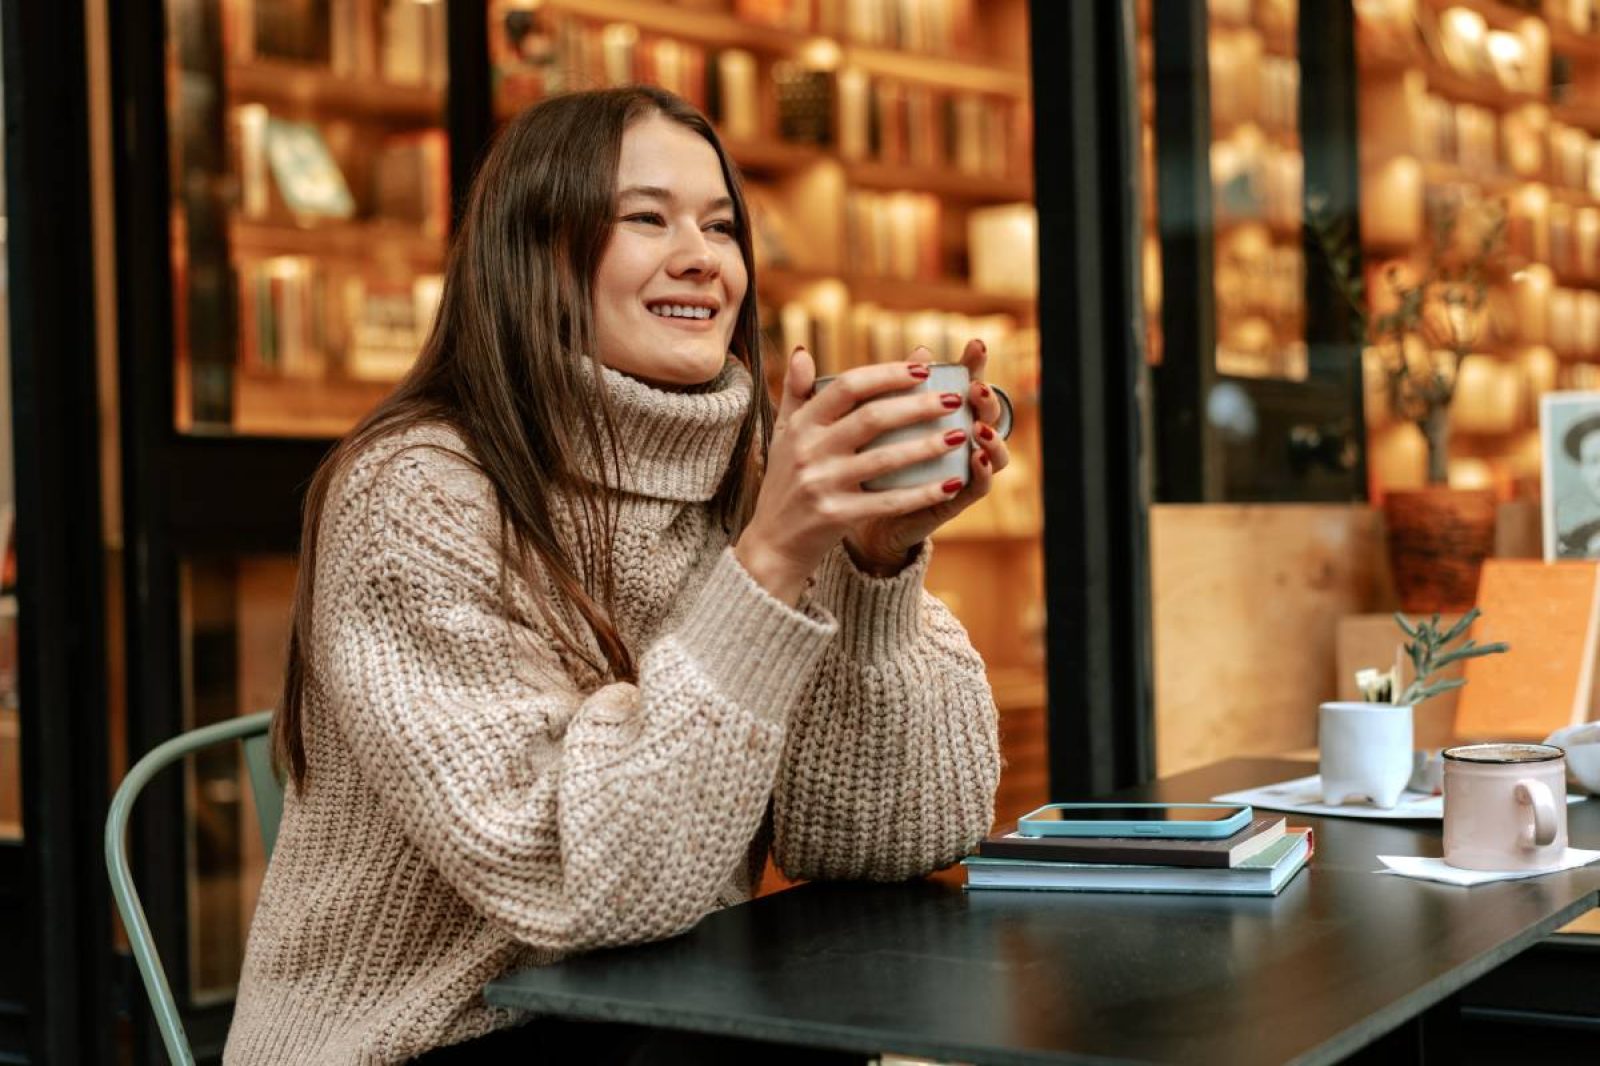 woman drinking coffee during fall after having successful digital marketing